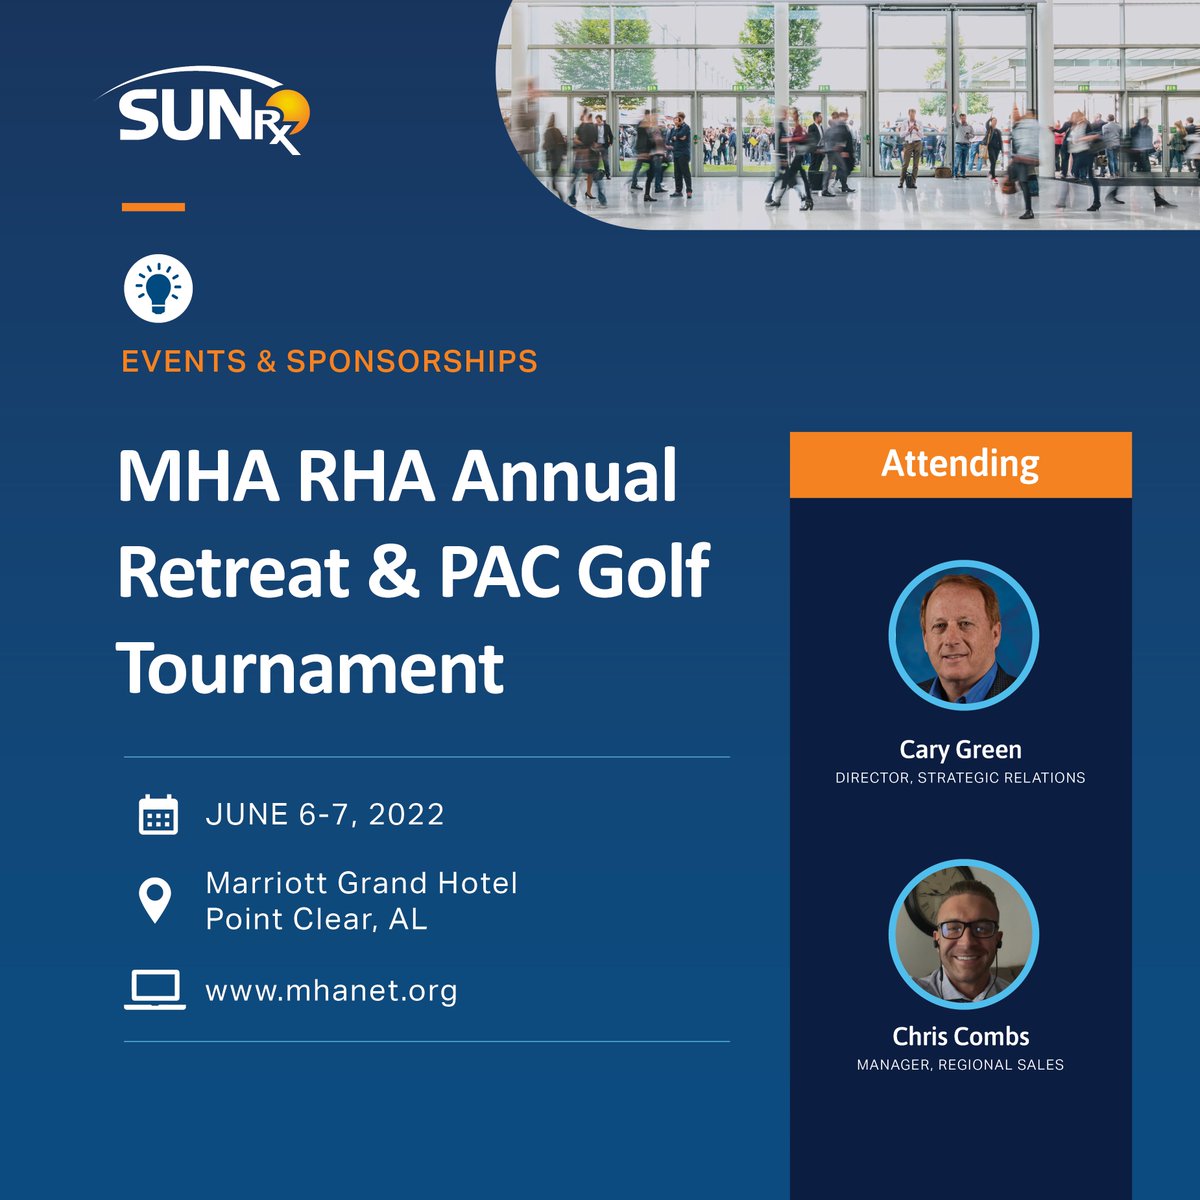 We are here in-person at the Mississippi Rural Hospital Alliance Annual Meeting and proudly sponsoring the PAC Golf Tourney! Look forward to connecting with you there! #340B #criticalaccesshospitals #inperson #networking